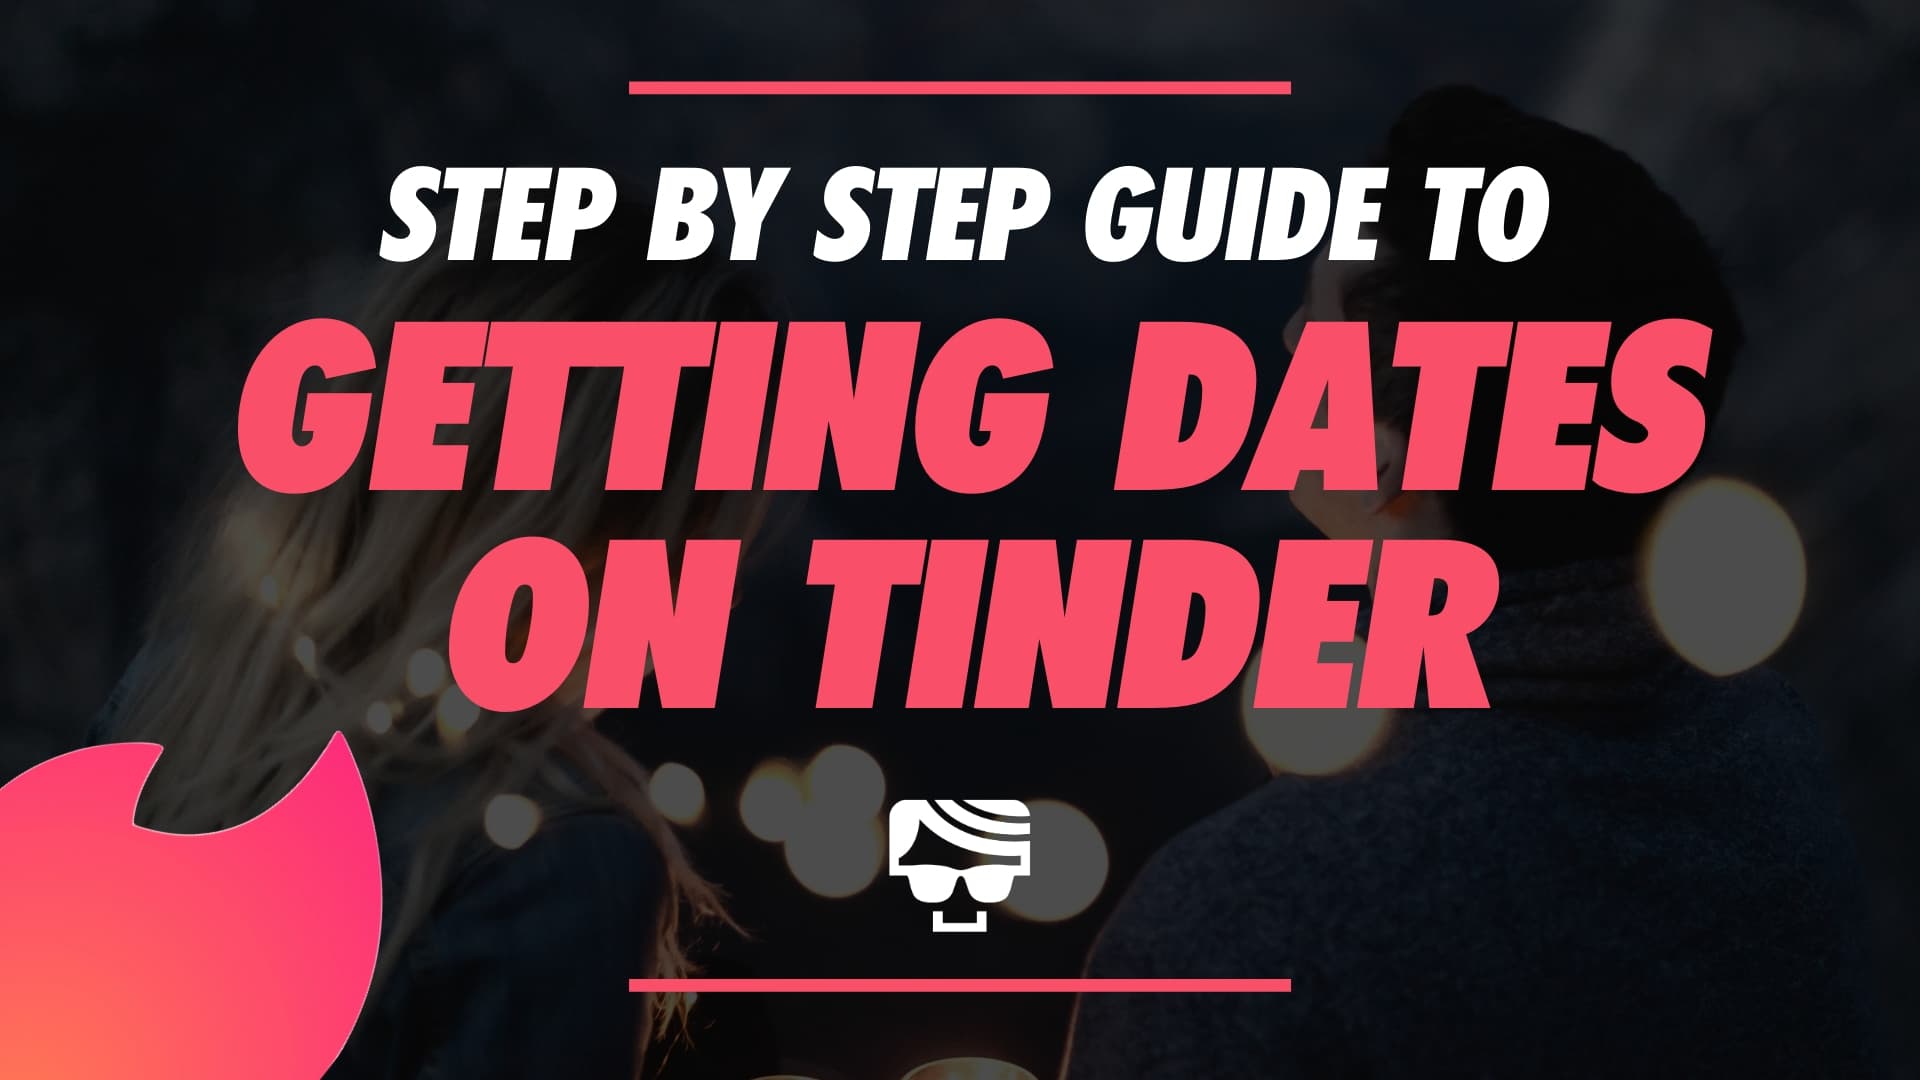 How To Get A Date On Tinder In 2022 – A Step By Step Guide